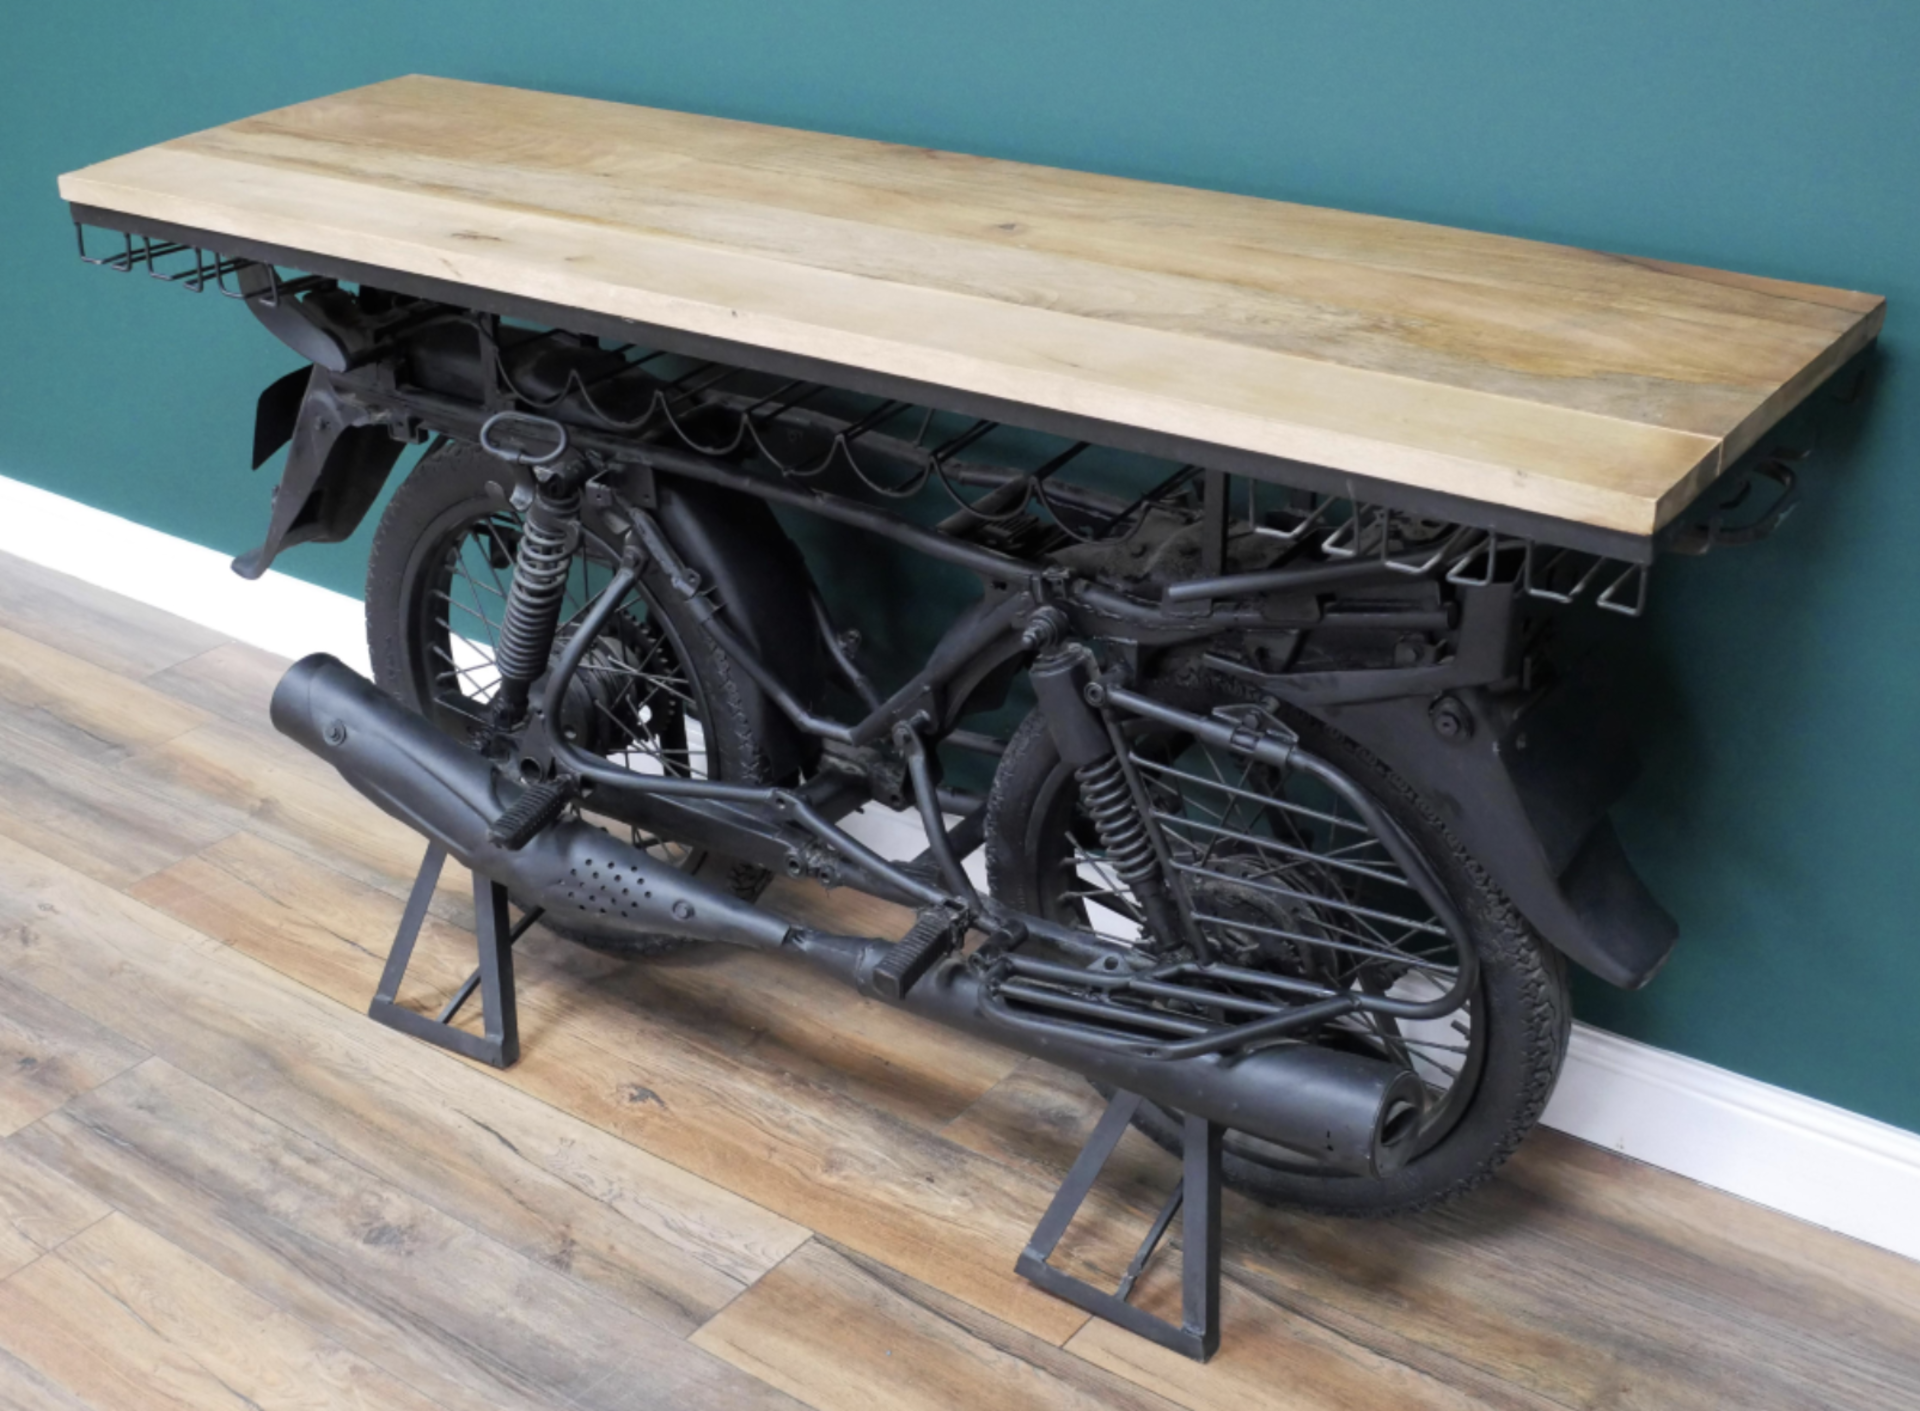 MOTORBIKE THEMED BAR TOP / COUNTER WITH WINE RACK AND GLASS HANGERS *PLUS VAT* - Image 3 of 6